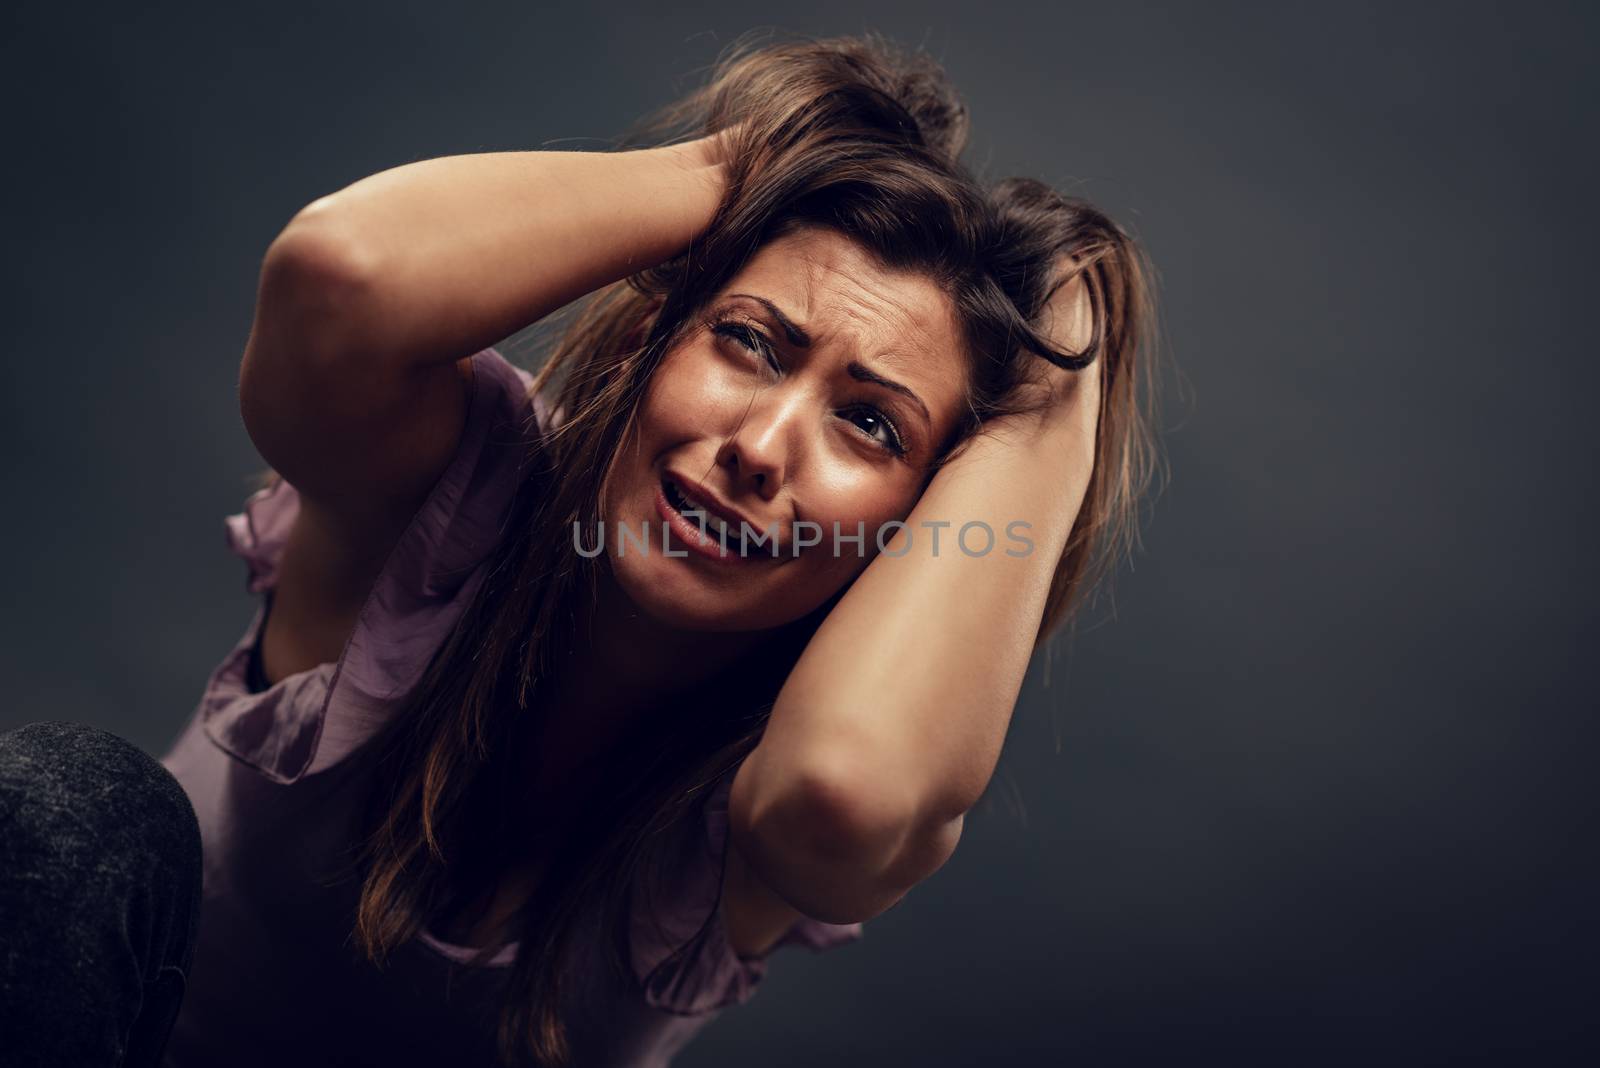 Young abused woman terrified looking with arms in her hair seeking safety.